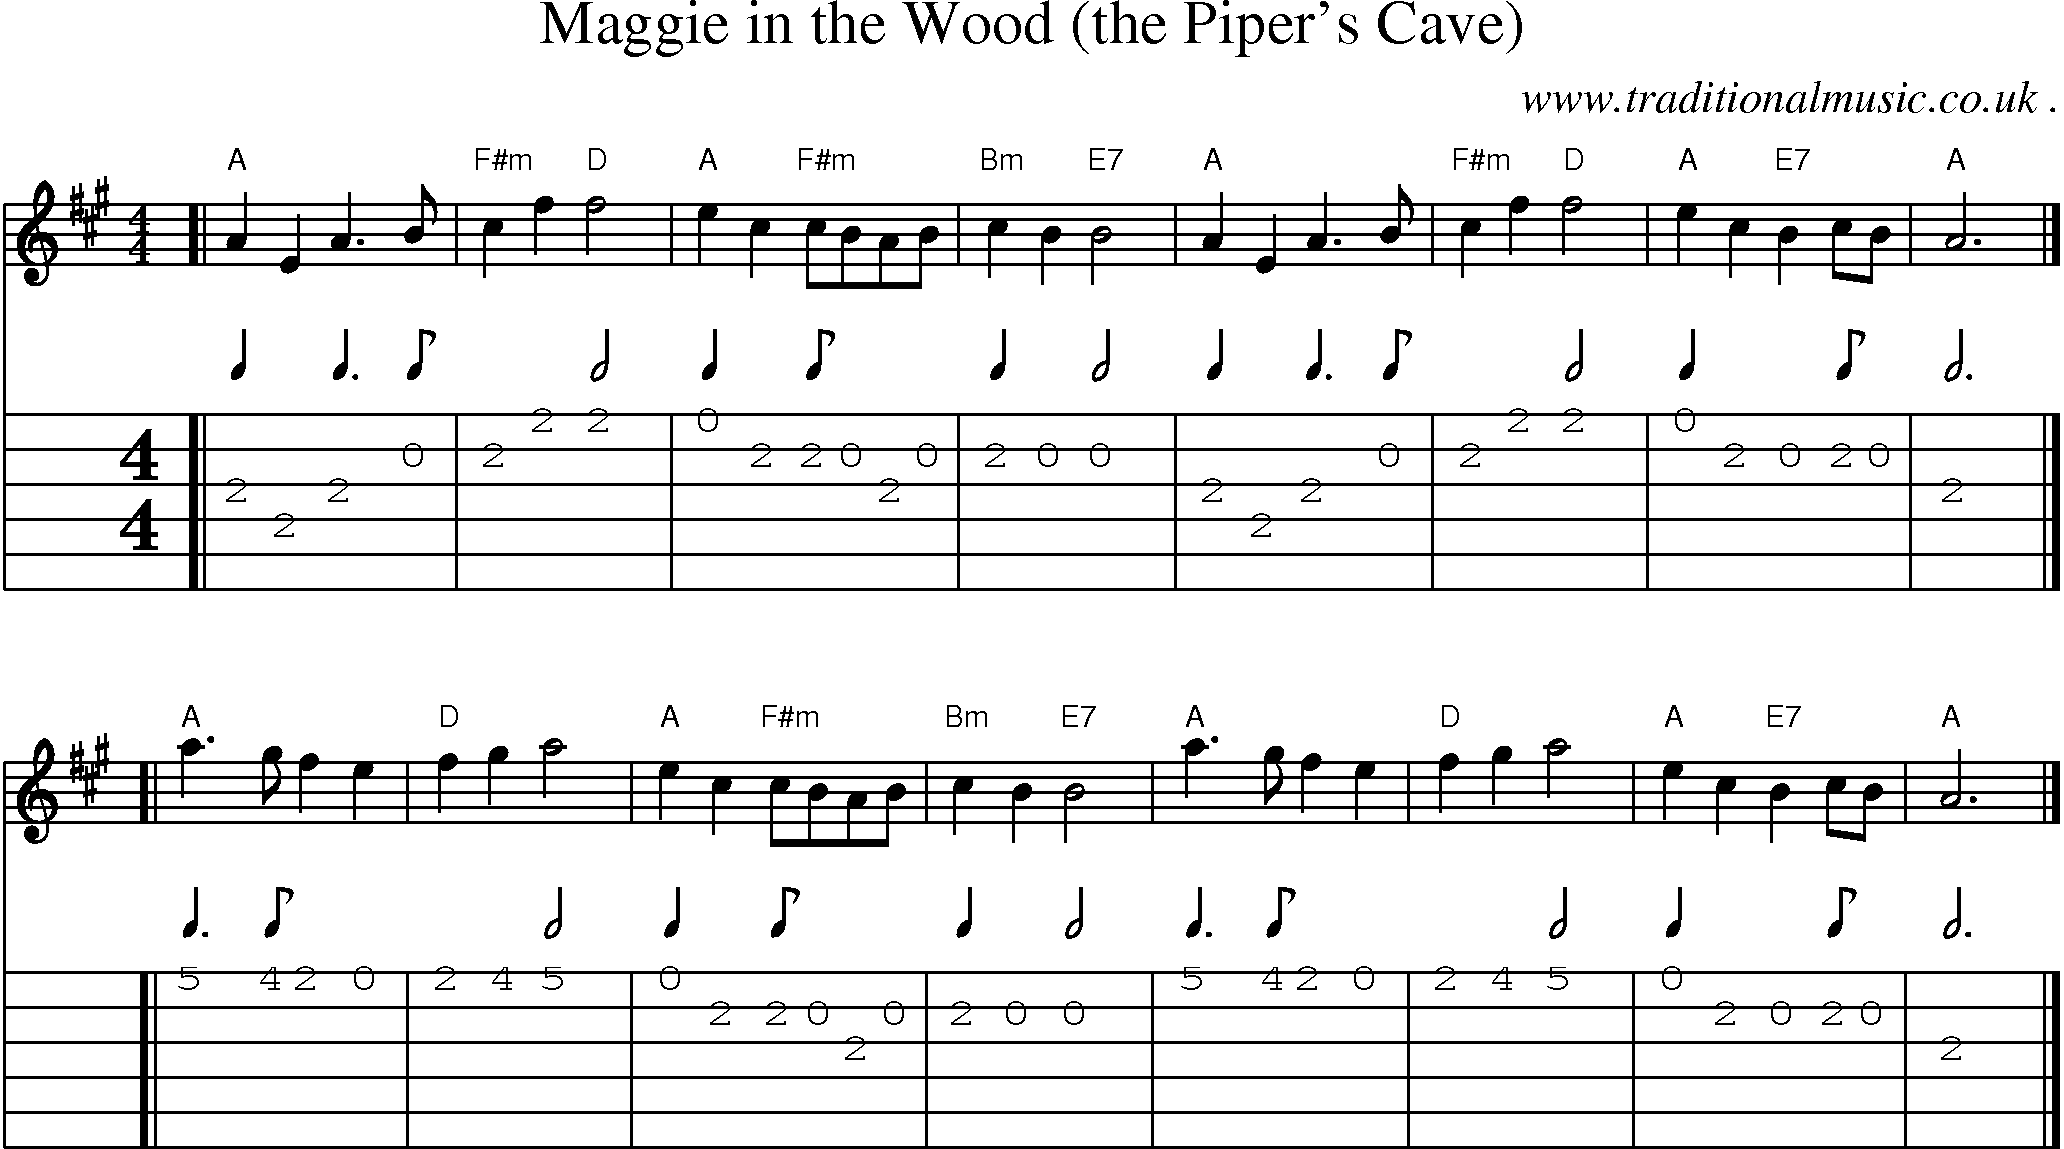 Sheet-music  score, Chords and Guitar Tabs for Maggie In The Wood The Pipers Cave